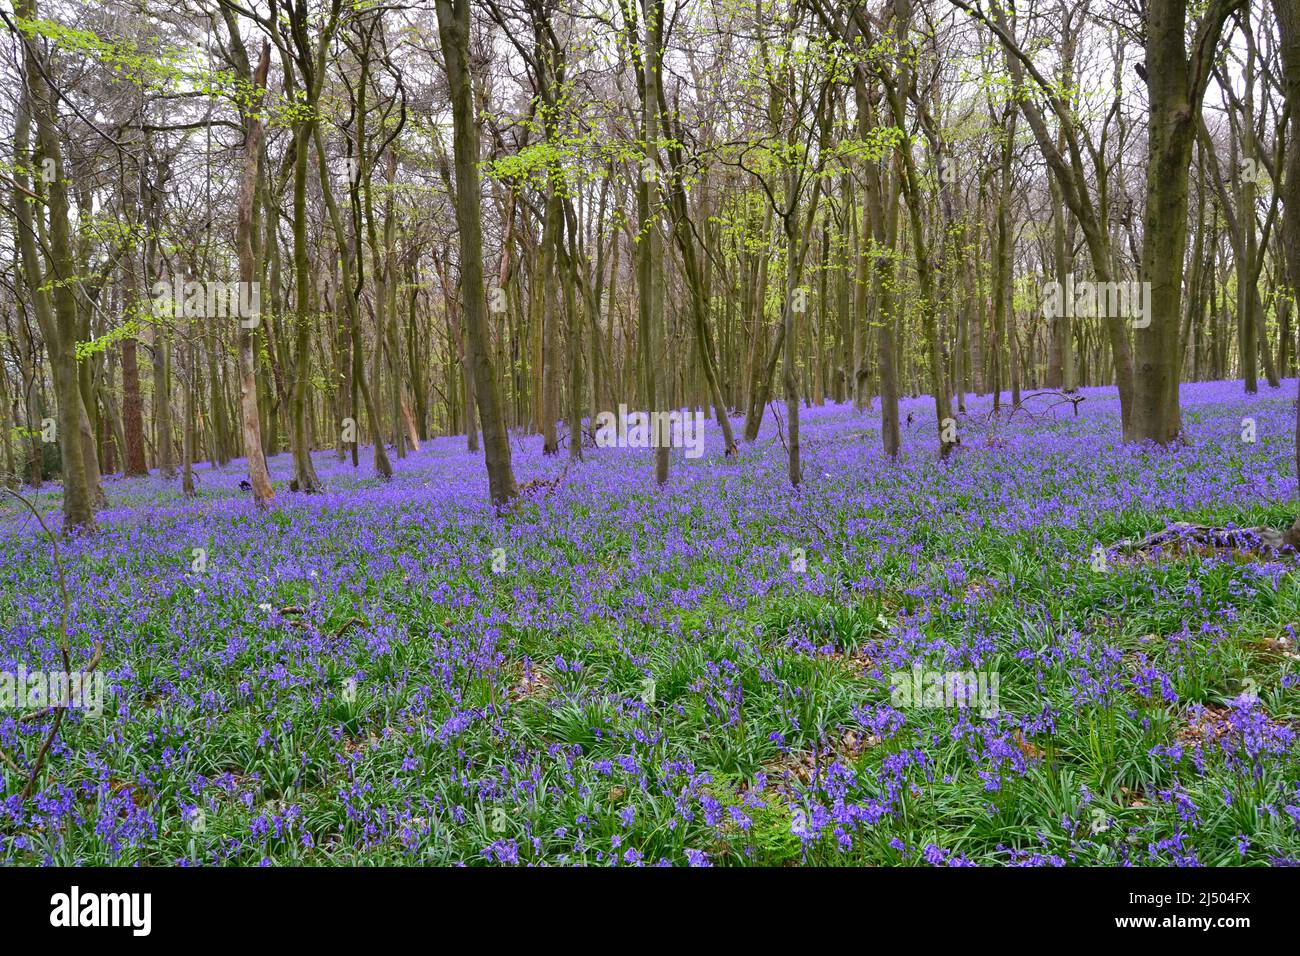 Meenfield woods in Shoreham woods, Darent Valley, Kent. Spectacular bluebells in North Downs beech woods in April near Bromley/Orpington. Stock Photo